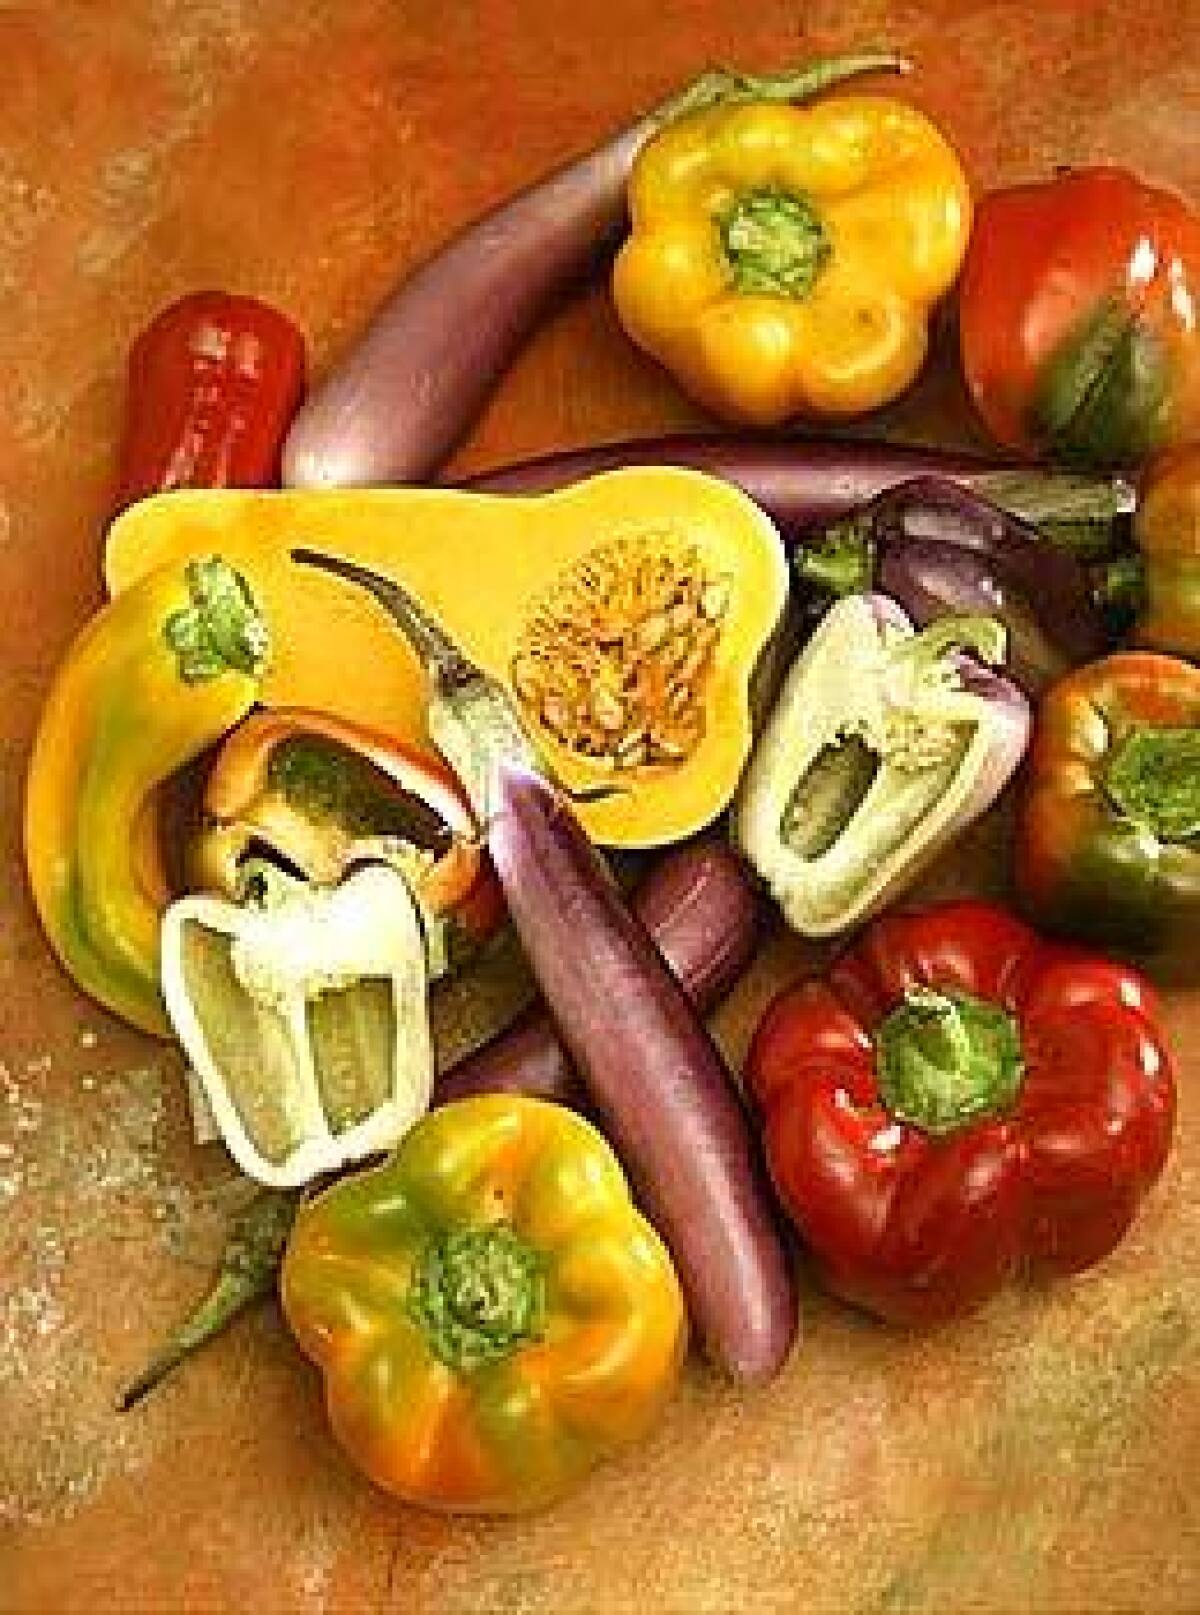 Peppers or squash? Hot or cool? Summer or fall? October in Southern California is a season on the tipping point, when late-summer produce still delights but autumn fruits and vegetables beckon.